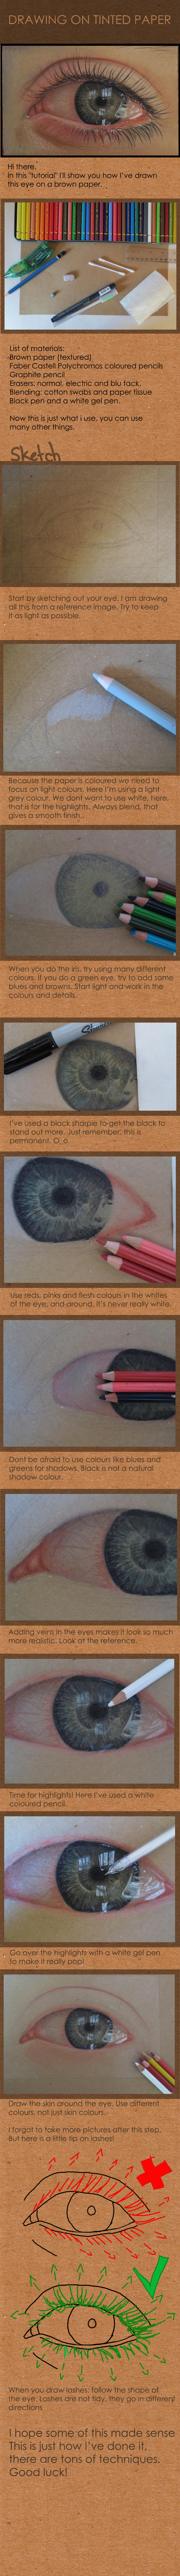 Drawing on tinted paper: Eye